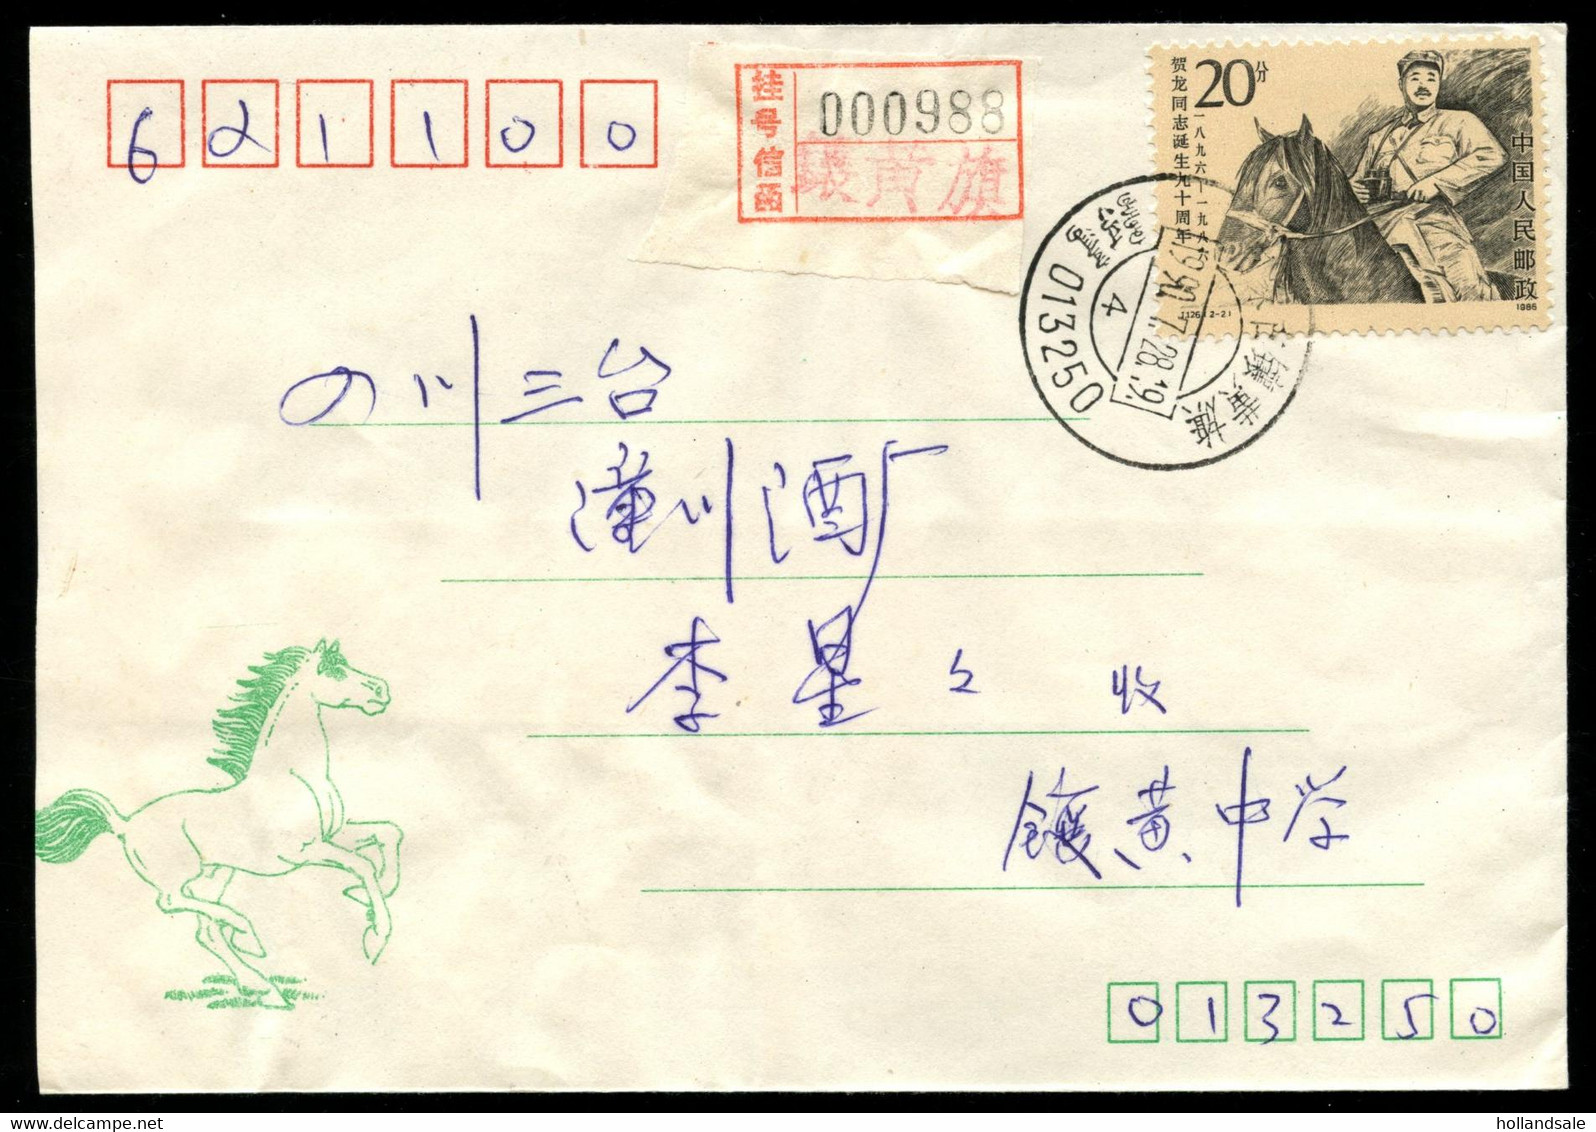 CHINA PRC / ADDED CHARGE - 1990, July 28 Cover Sent From Xianghuangqi To Santai. D&O # 18-0057 - Postage Due